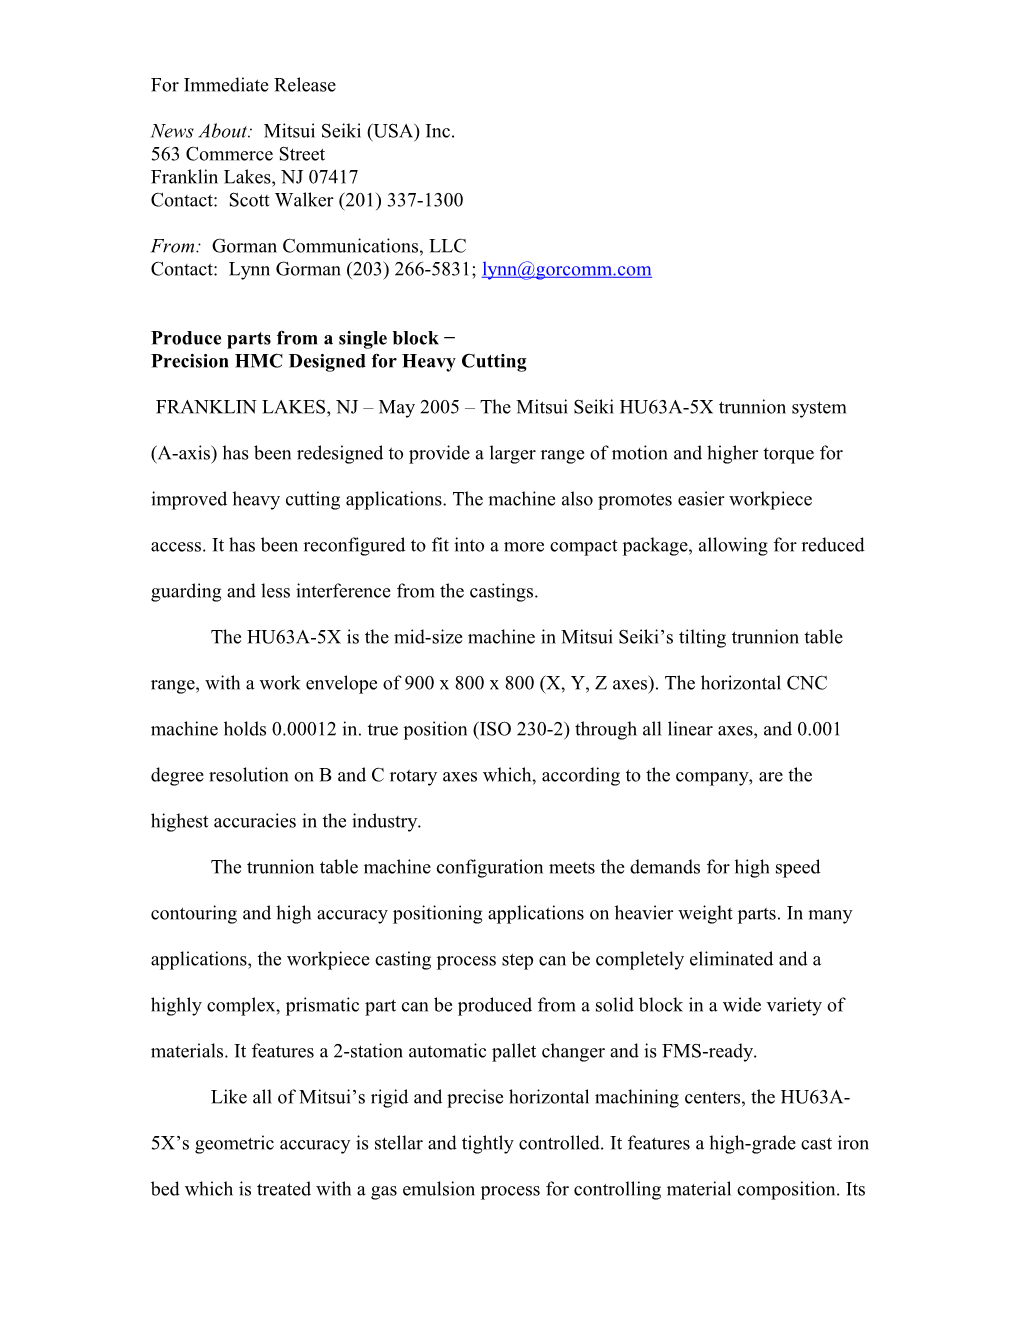 For Immediate Release at IMTS 2004